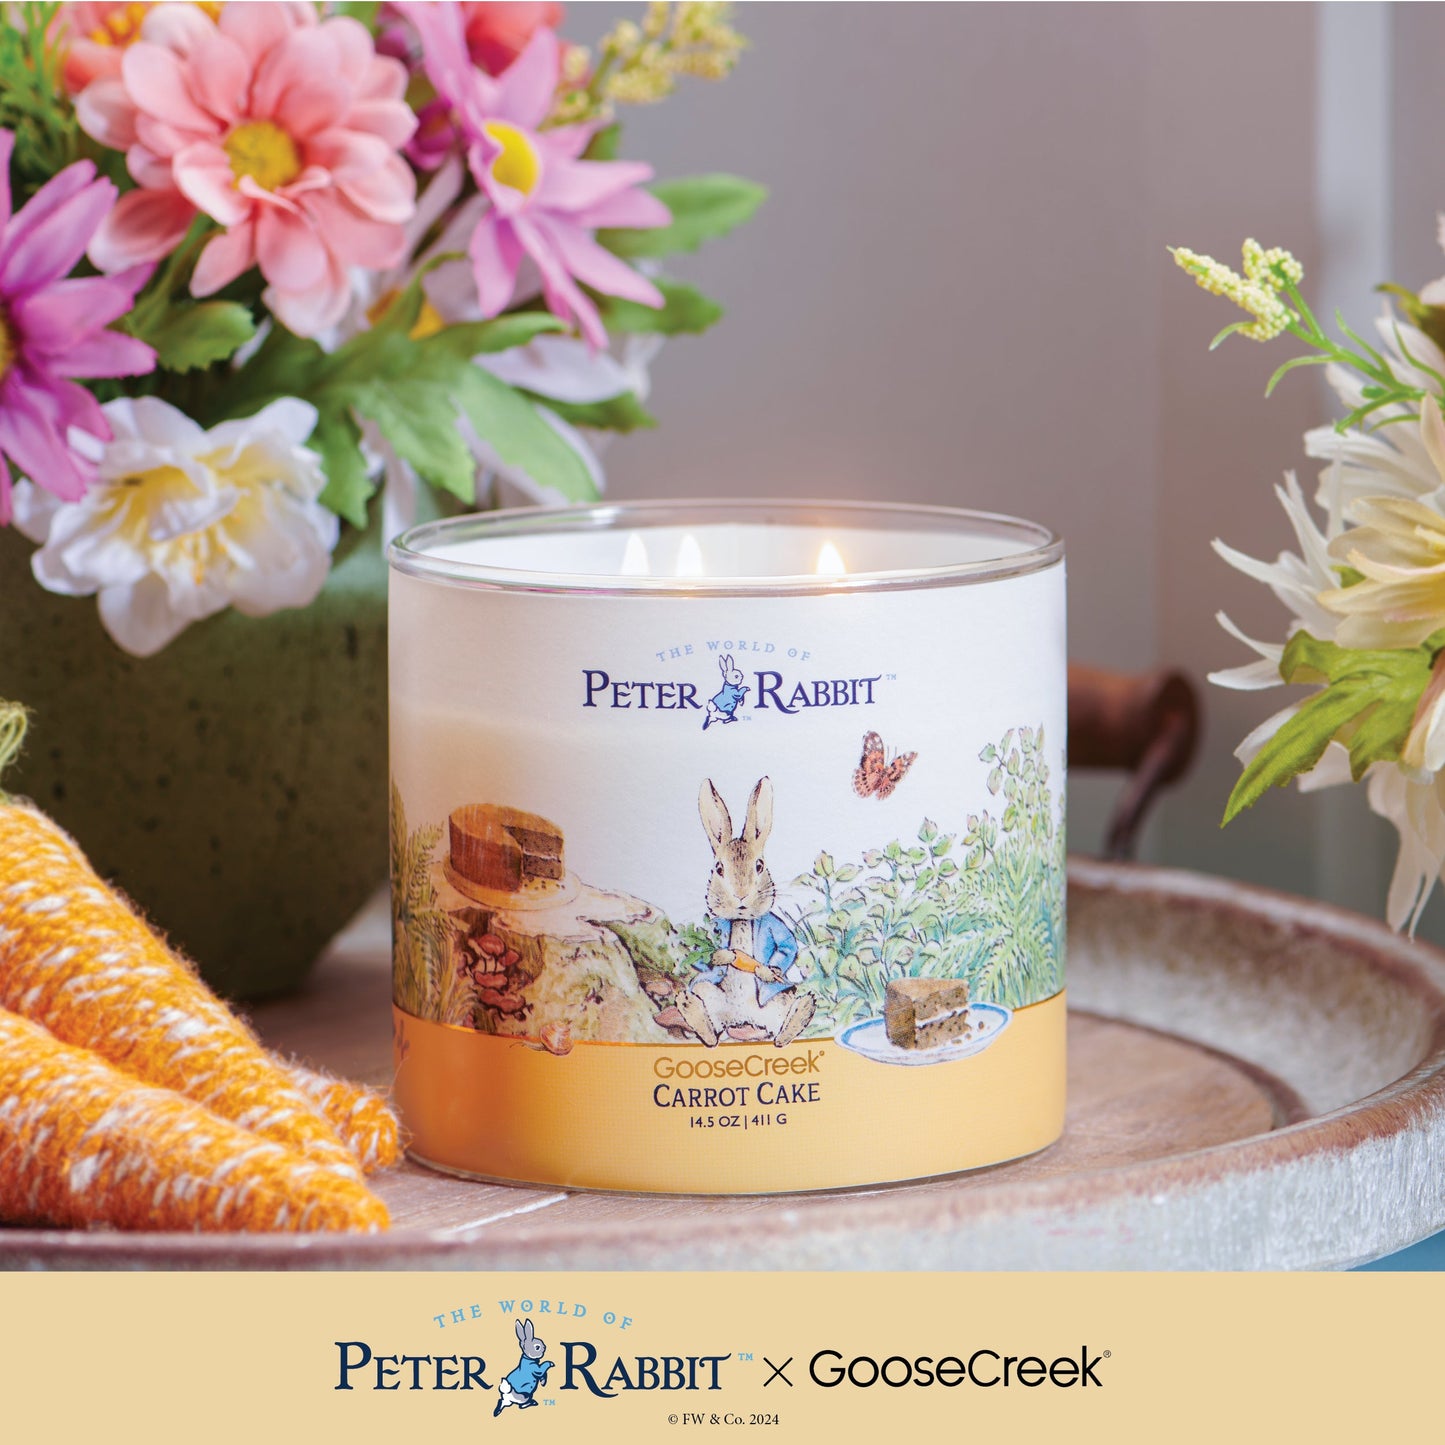 Peter Rabbit - Carrot Cake Large 3-Wick Candle